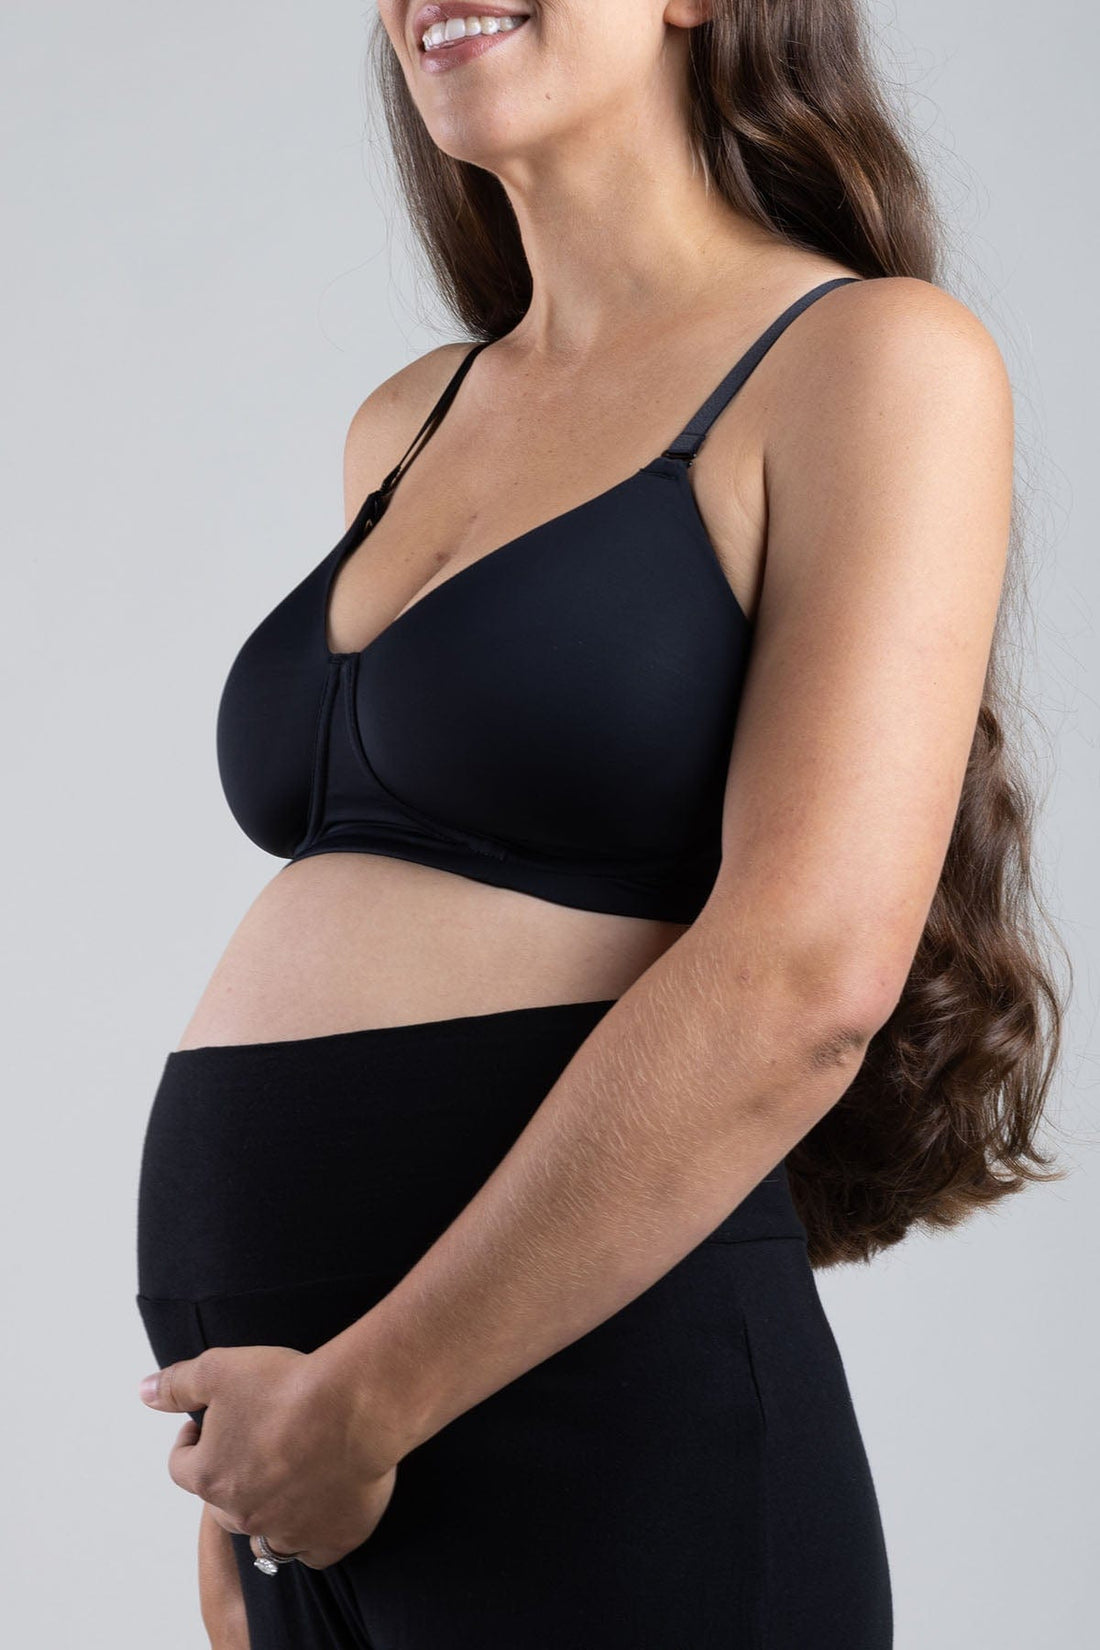 Simple Wishes Undercover Nursing T-Shirt Bra with hide the nursing clasp in black shown on pregnant model 